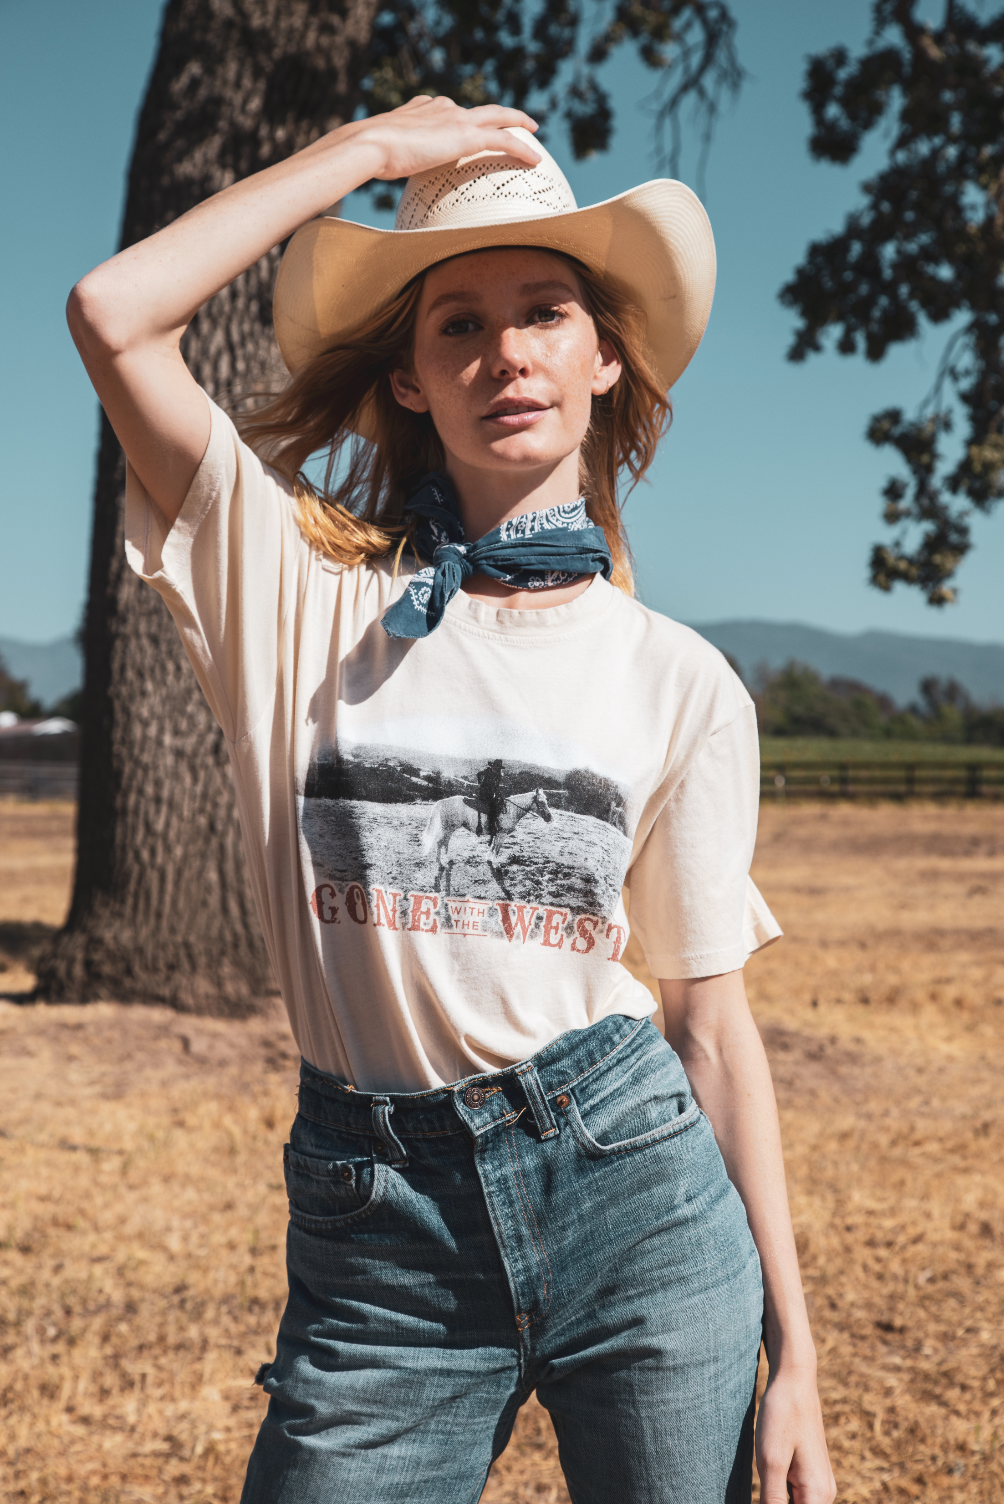 Gone With The West Tee